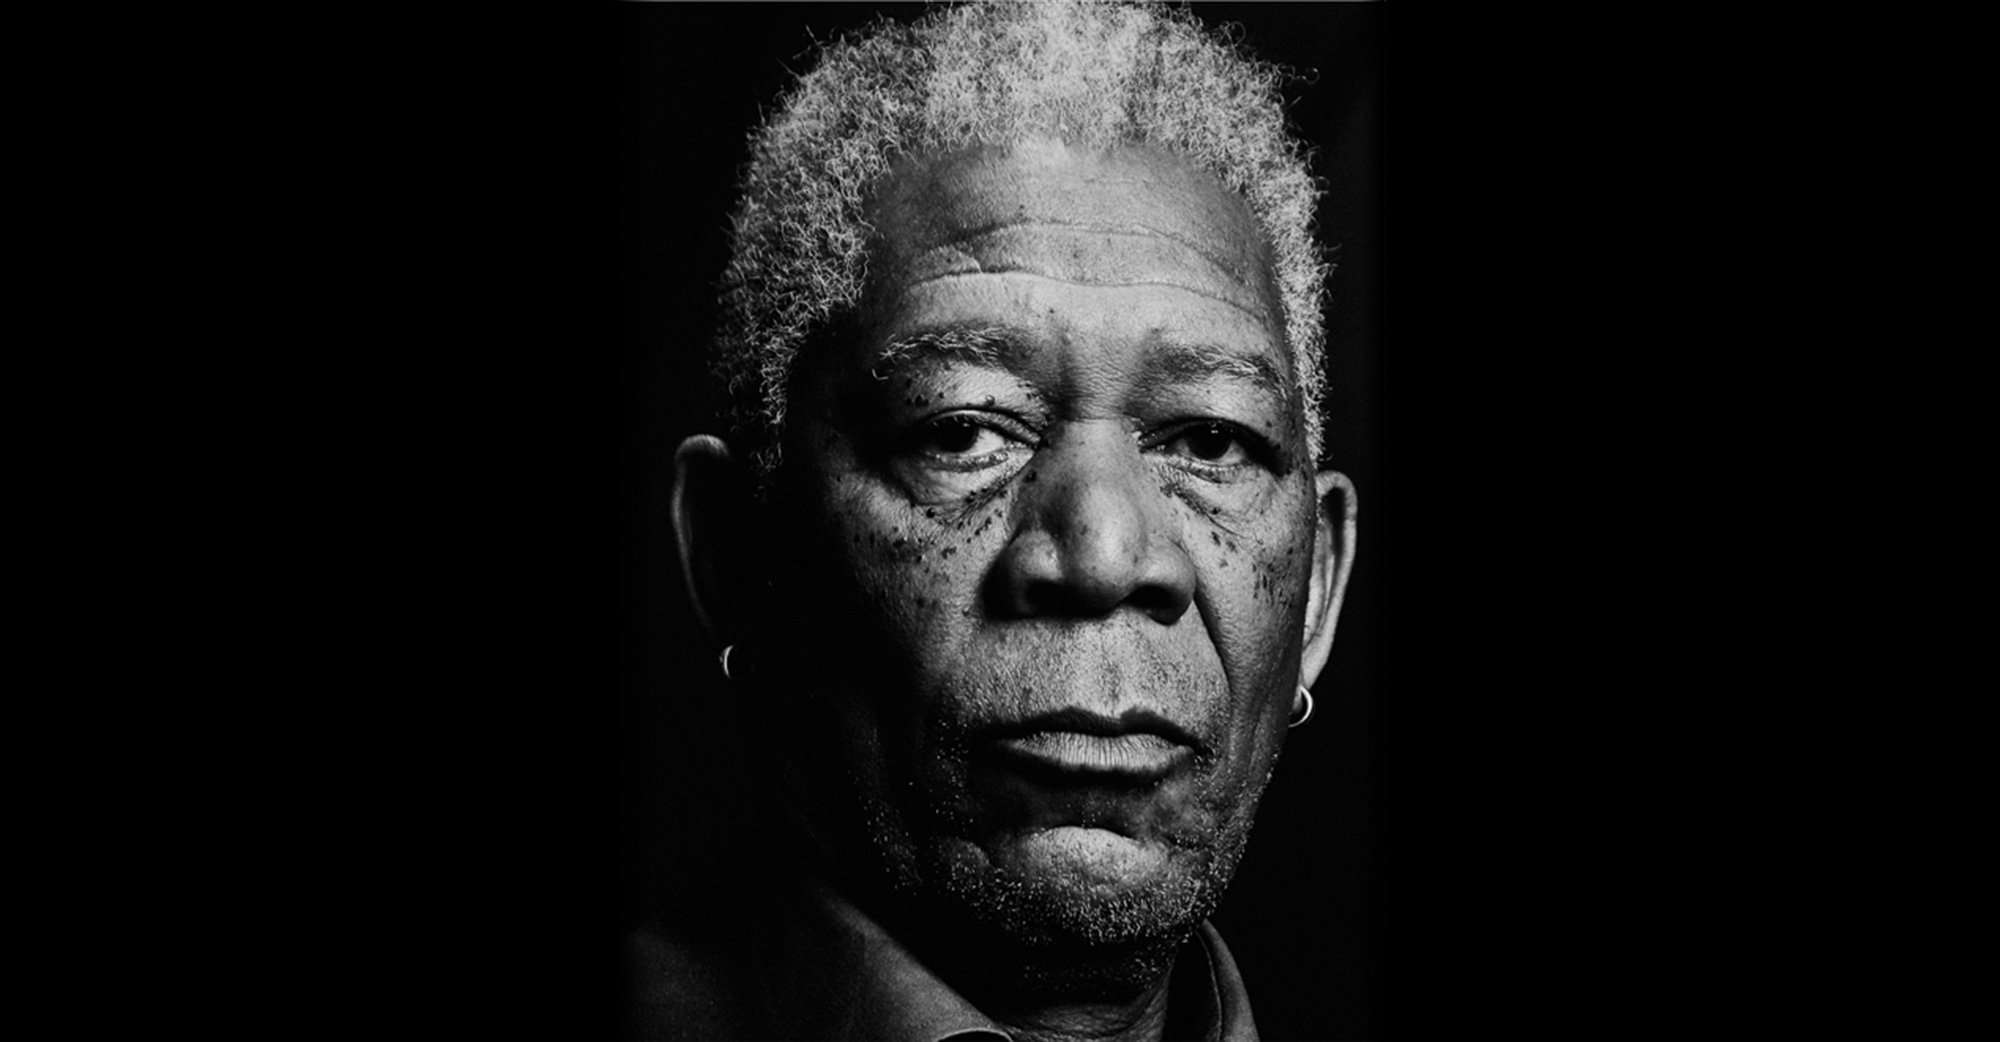 image for TIL that Morgan Freeman wears his earrings because they are just worth enough to pay for a coffin in case he dies in a strange place.